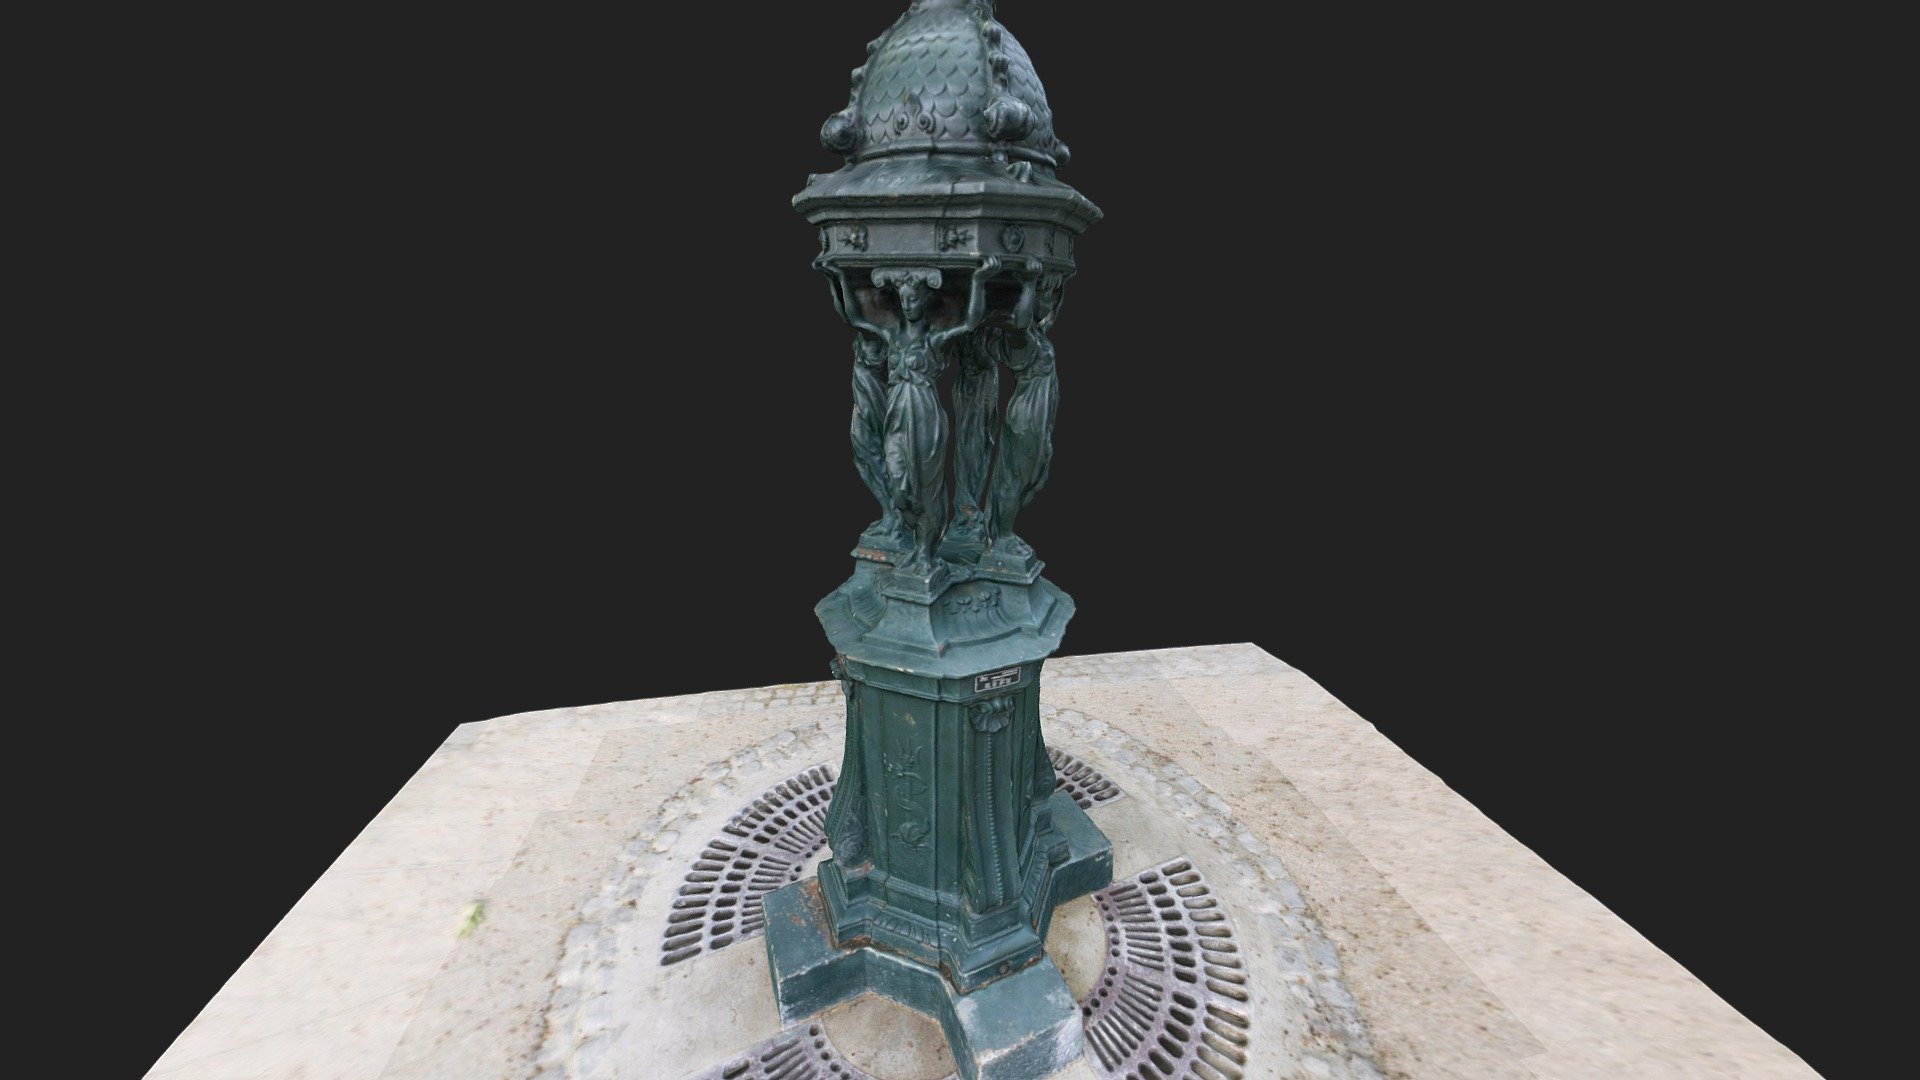 One of the many Wallace fountains in Paris. There are hundreds of them in Paris, and provide drinkable water.

Learn more about Wallace fountains on Wikipedia - Fontaine Wallace - Download Free 3D model by Maurice Svay (@mauricesvay) 3d model